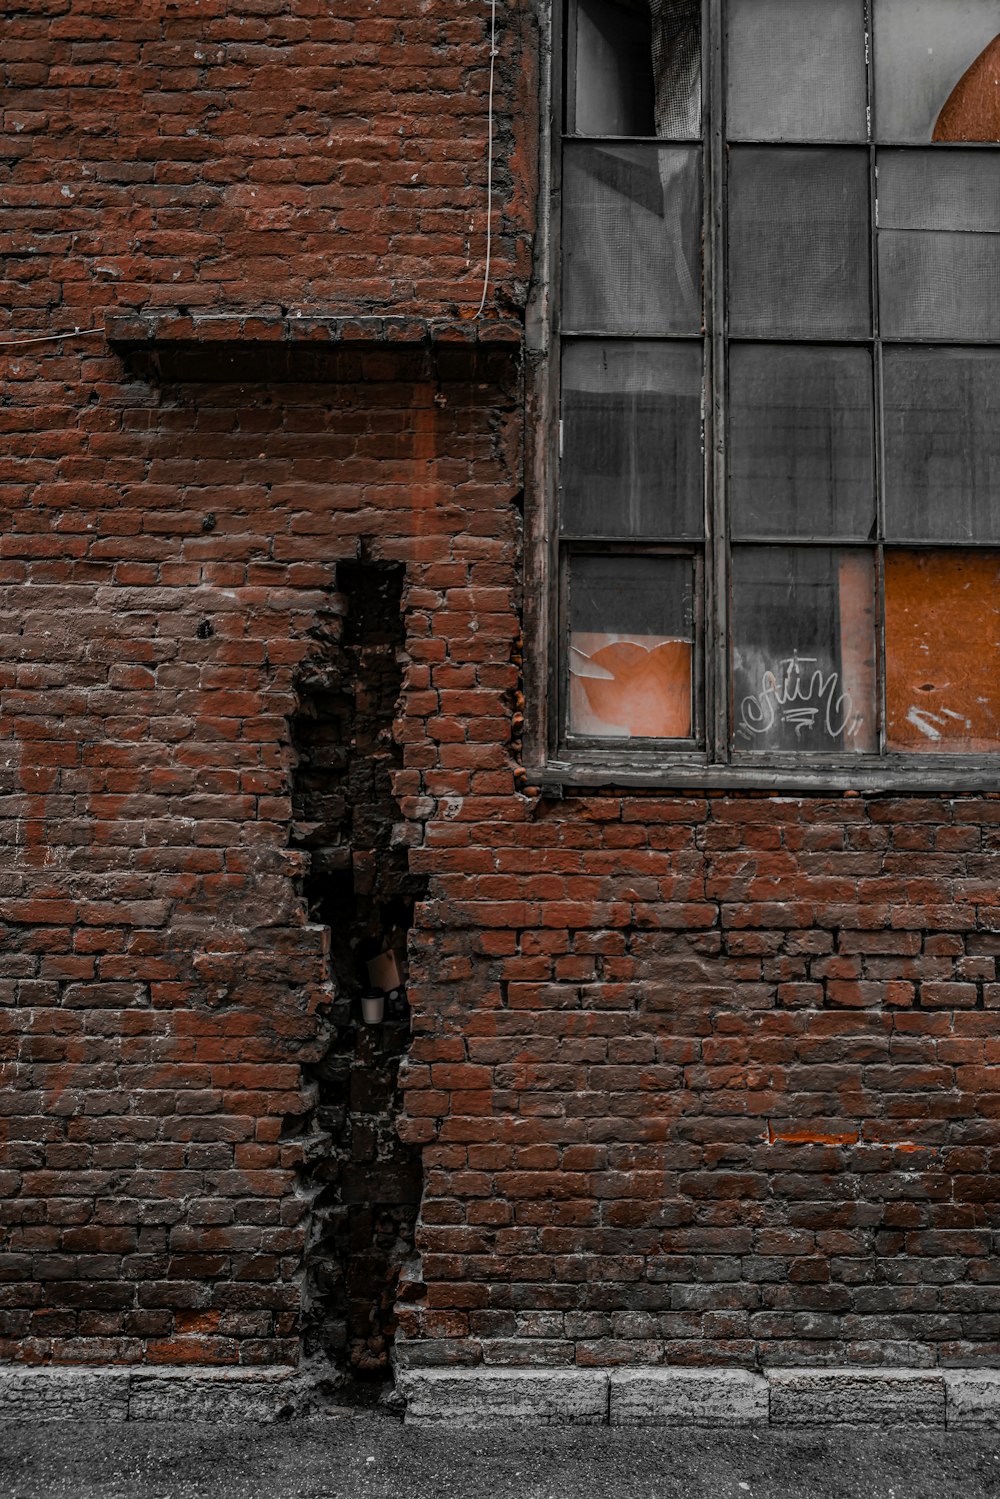 a red brick building with a broken window